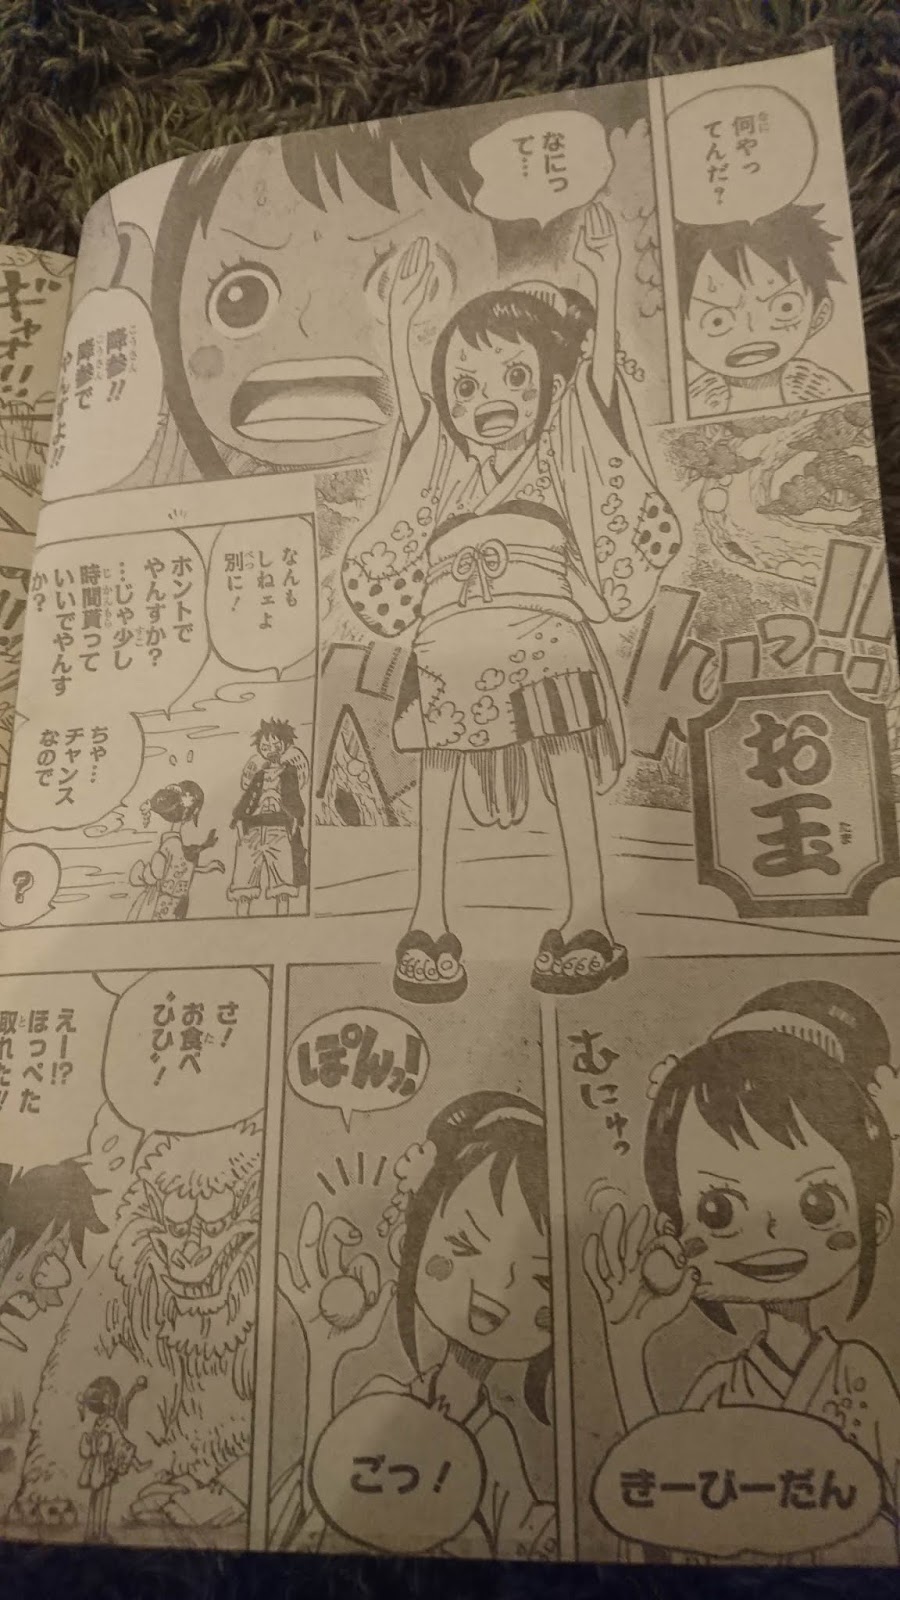 Spoiler Manga One Piece Chapter 911 English A Great Adventure In The Land Of Samurai Picture Opopnomi